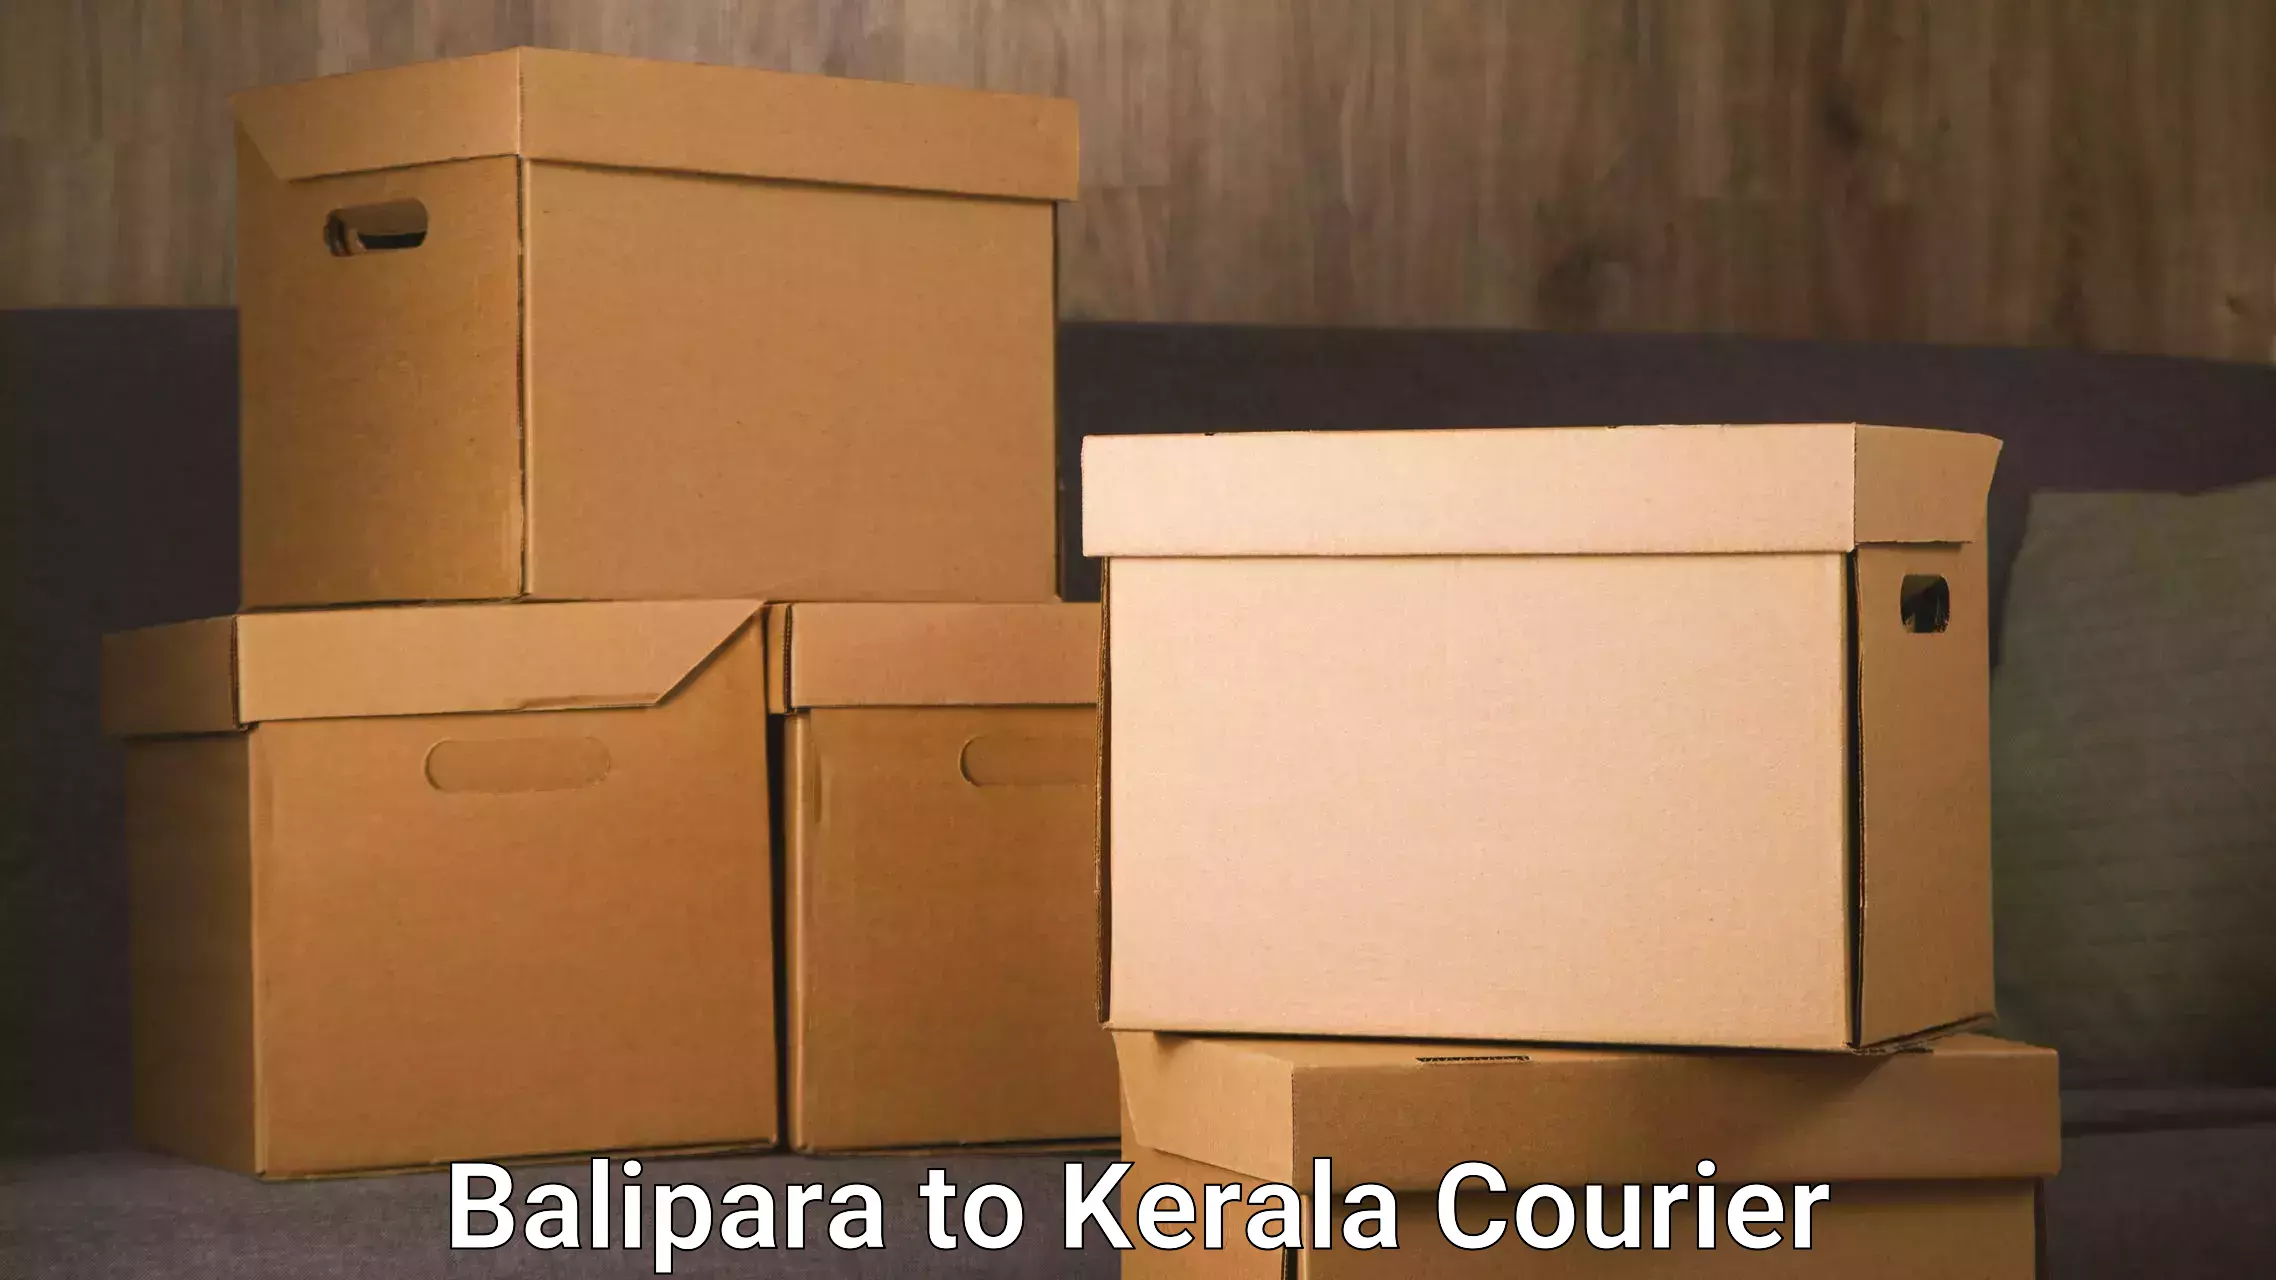 Courier service comparison Balipara to Rajamudy